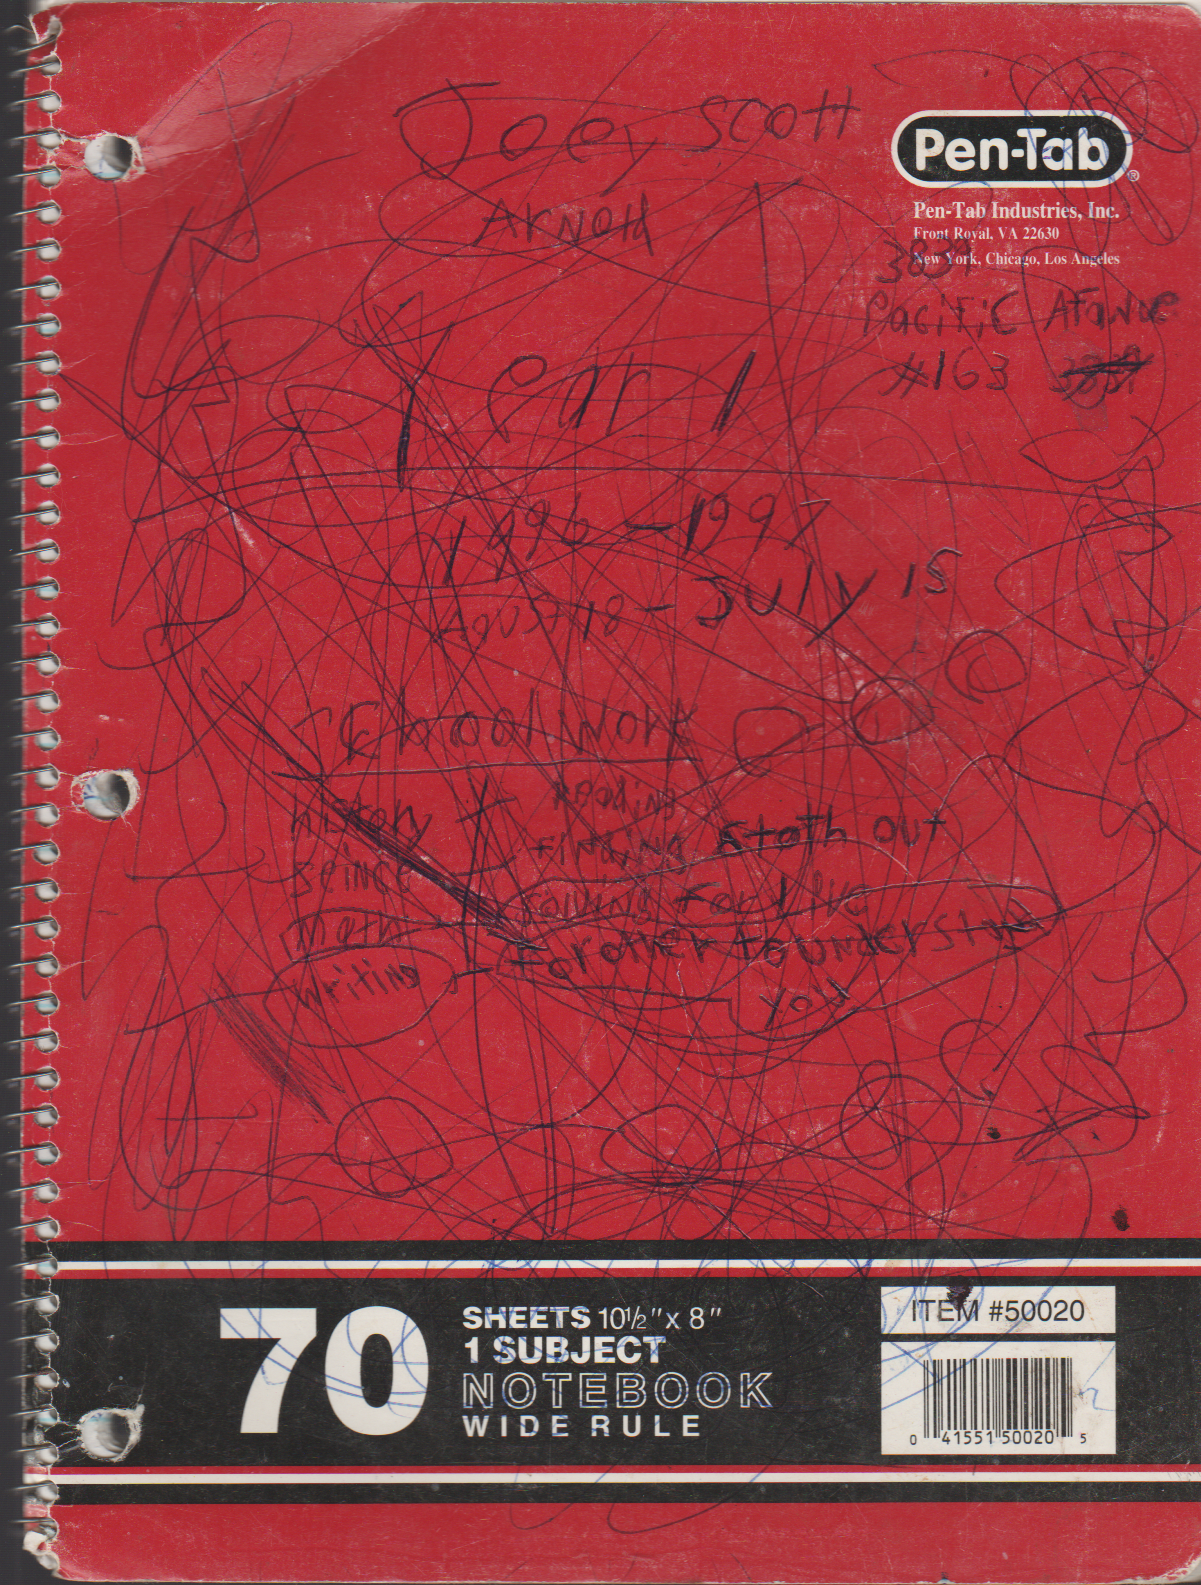 1996-08-18 - Saturday - 11 yr old Joey Arnold's School Book, dates through to 1998 apx, mostly 96, Writings, Drawings, Etc-001.png